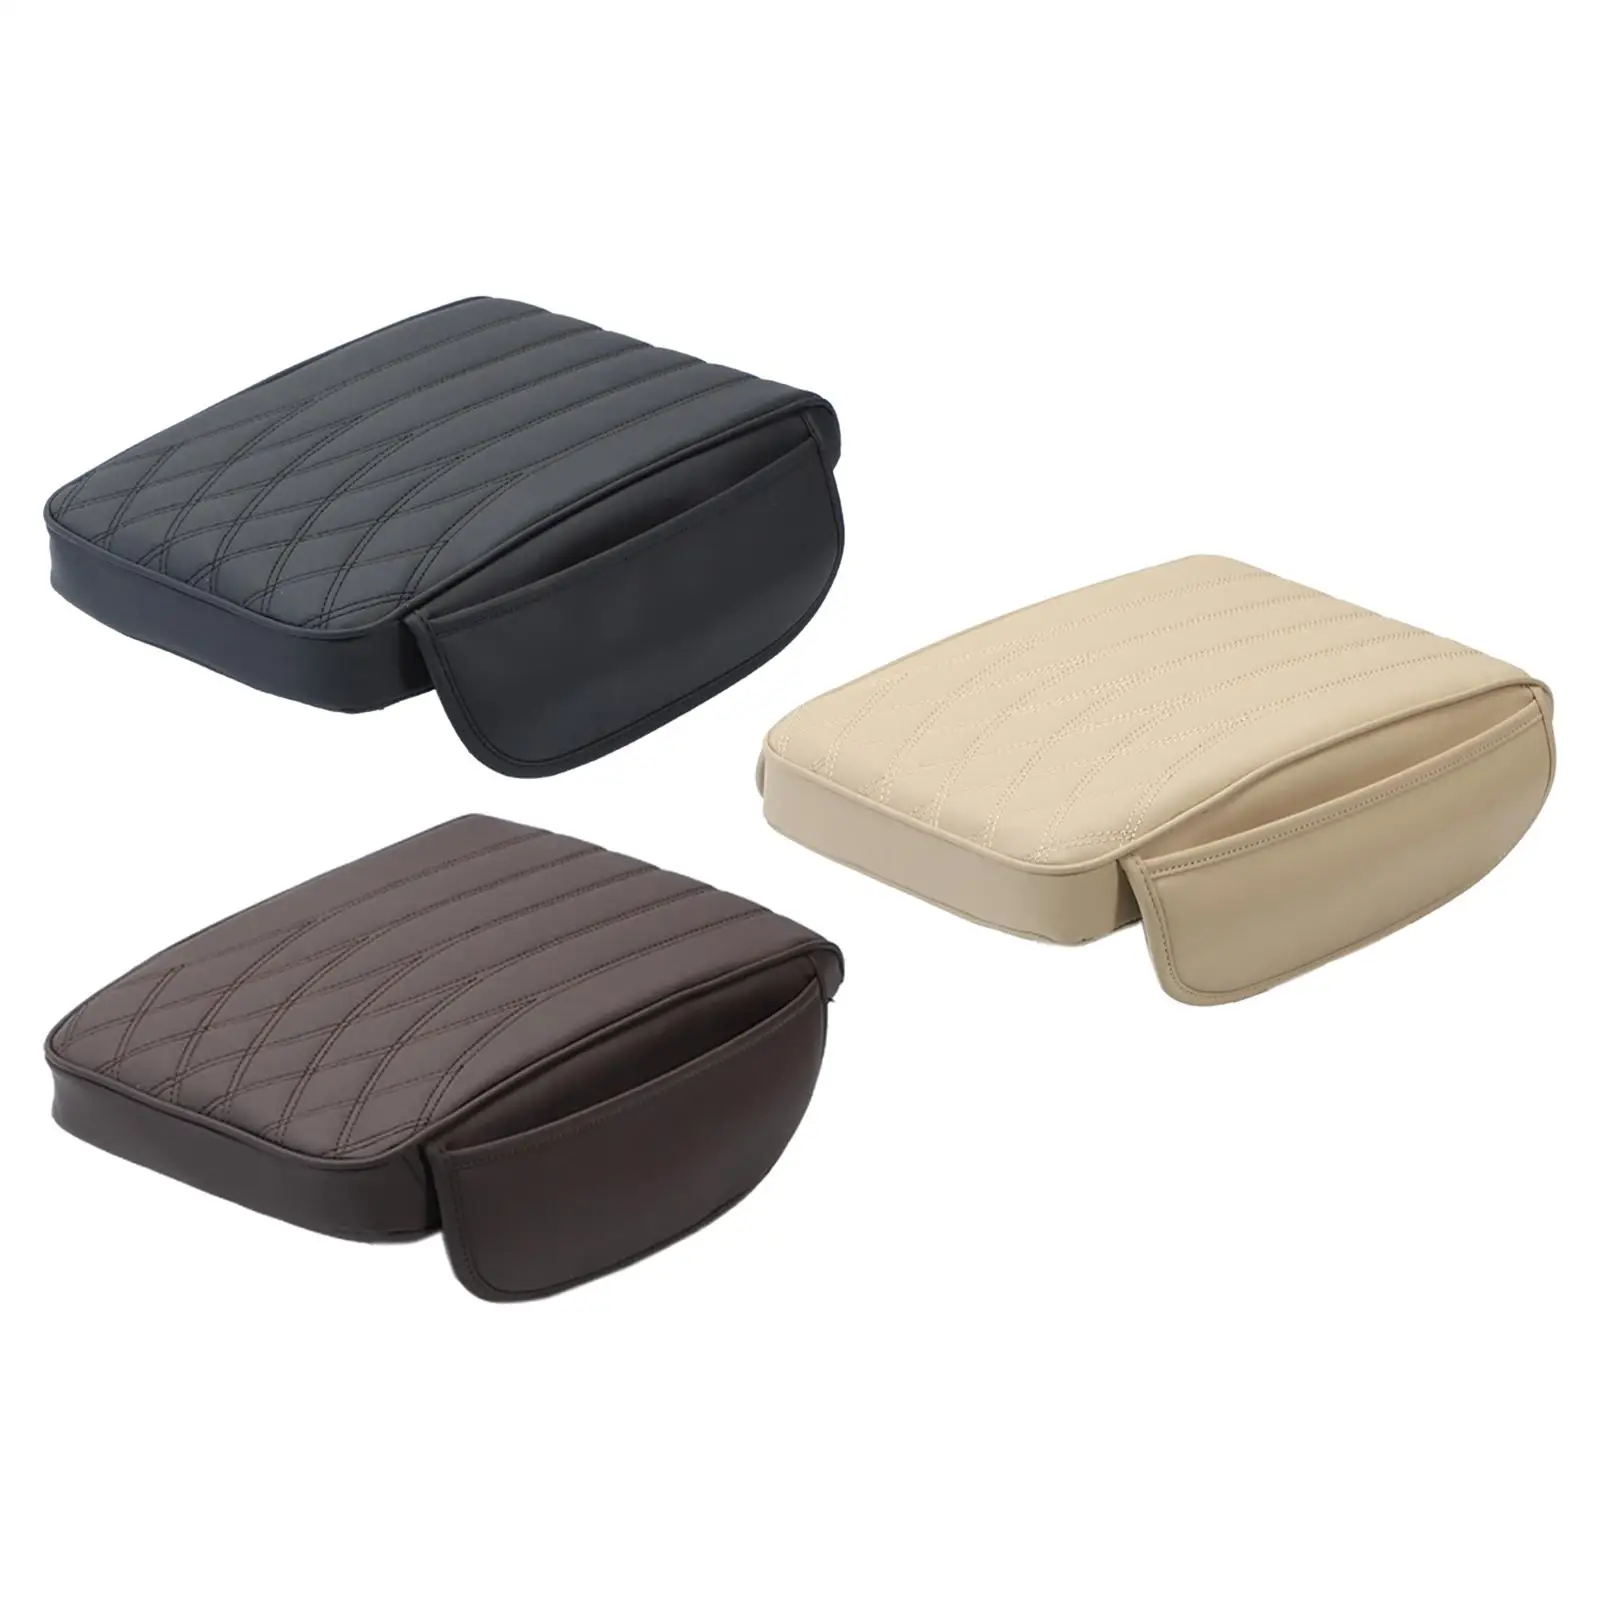 Car Armrest Cushion Interior Accessories Arm Rest Pad for Truck Vehicle